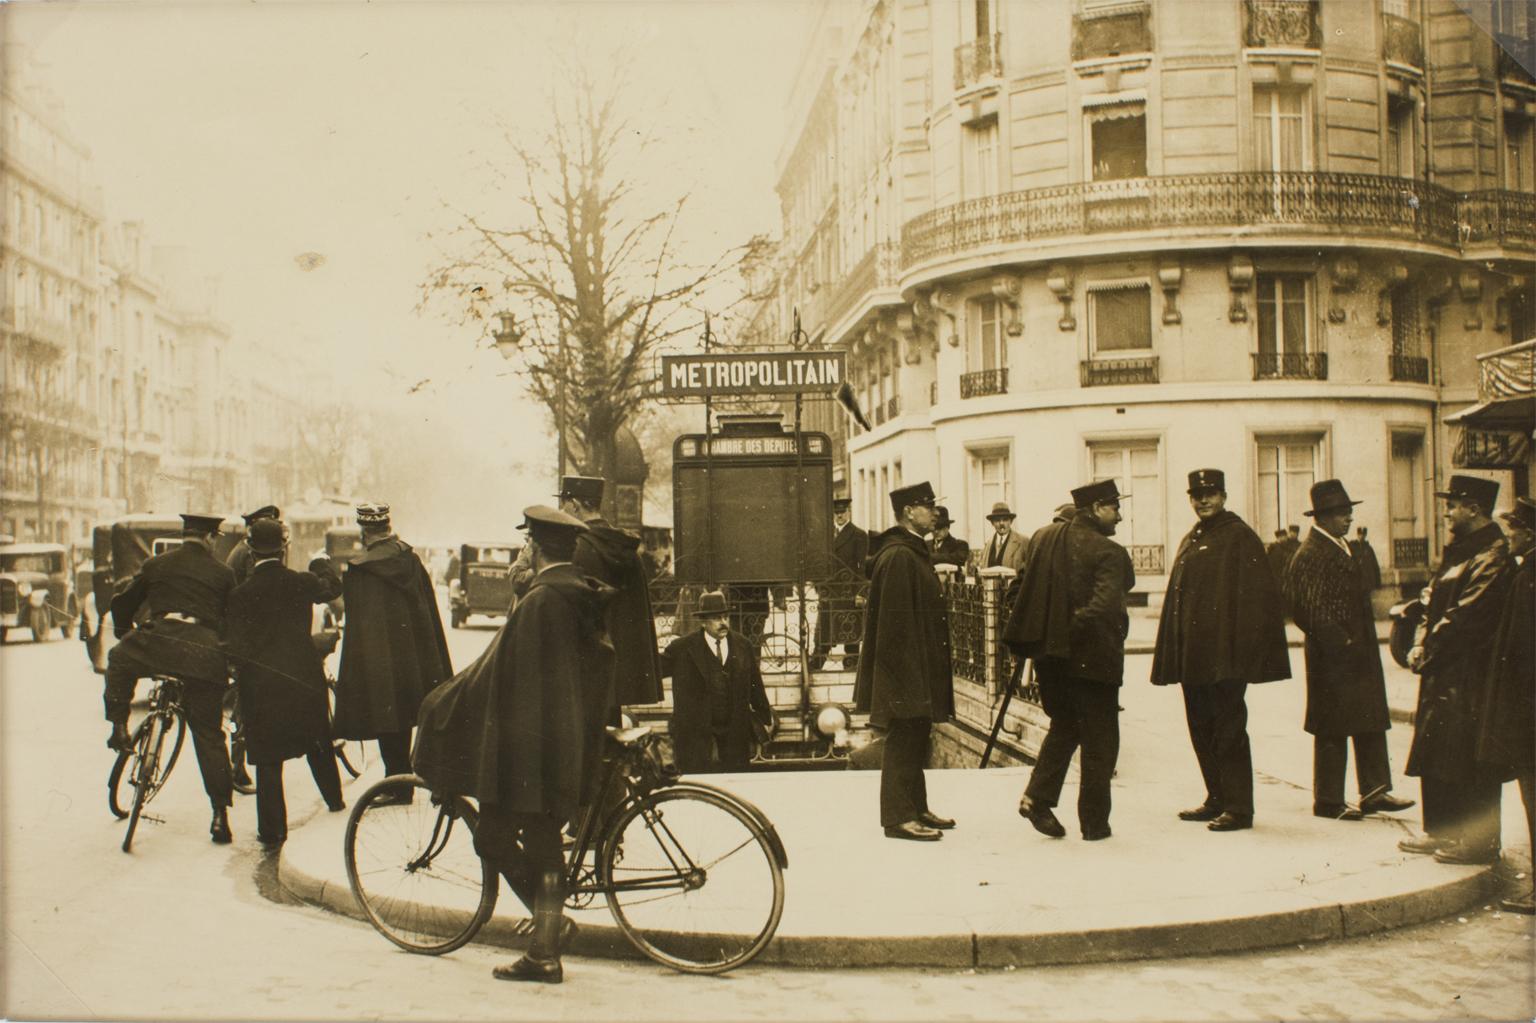 A unique original silver gelatin black and white photograph by Press Agency Keystone View Co. Policemen in Paris, circa 1930.
French police officers in Paris in front of a subway station waiting for the start of a communist demonstration. In the